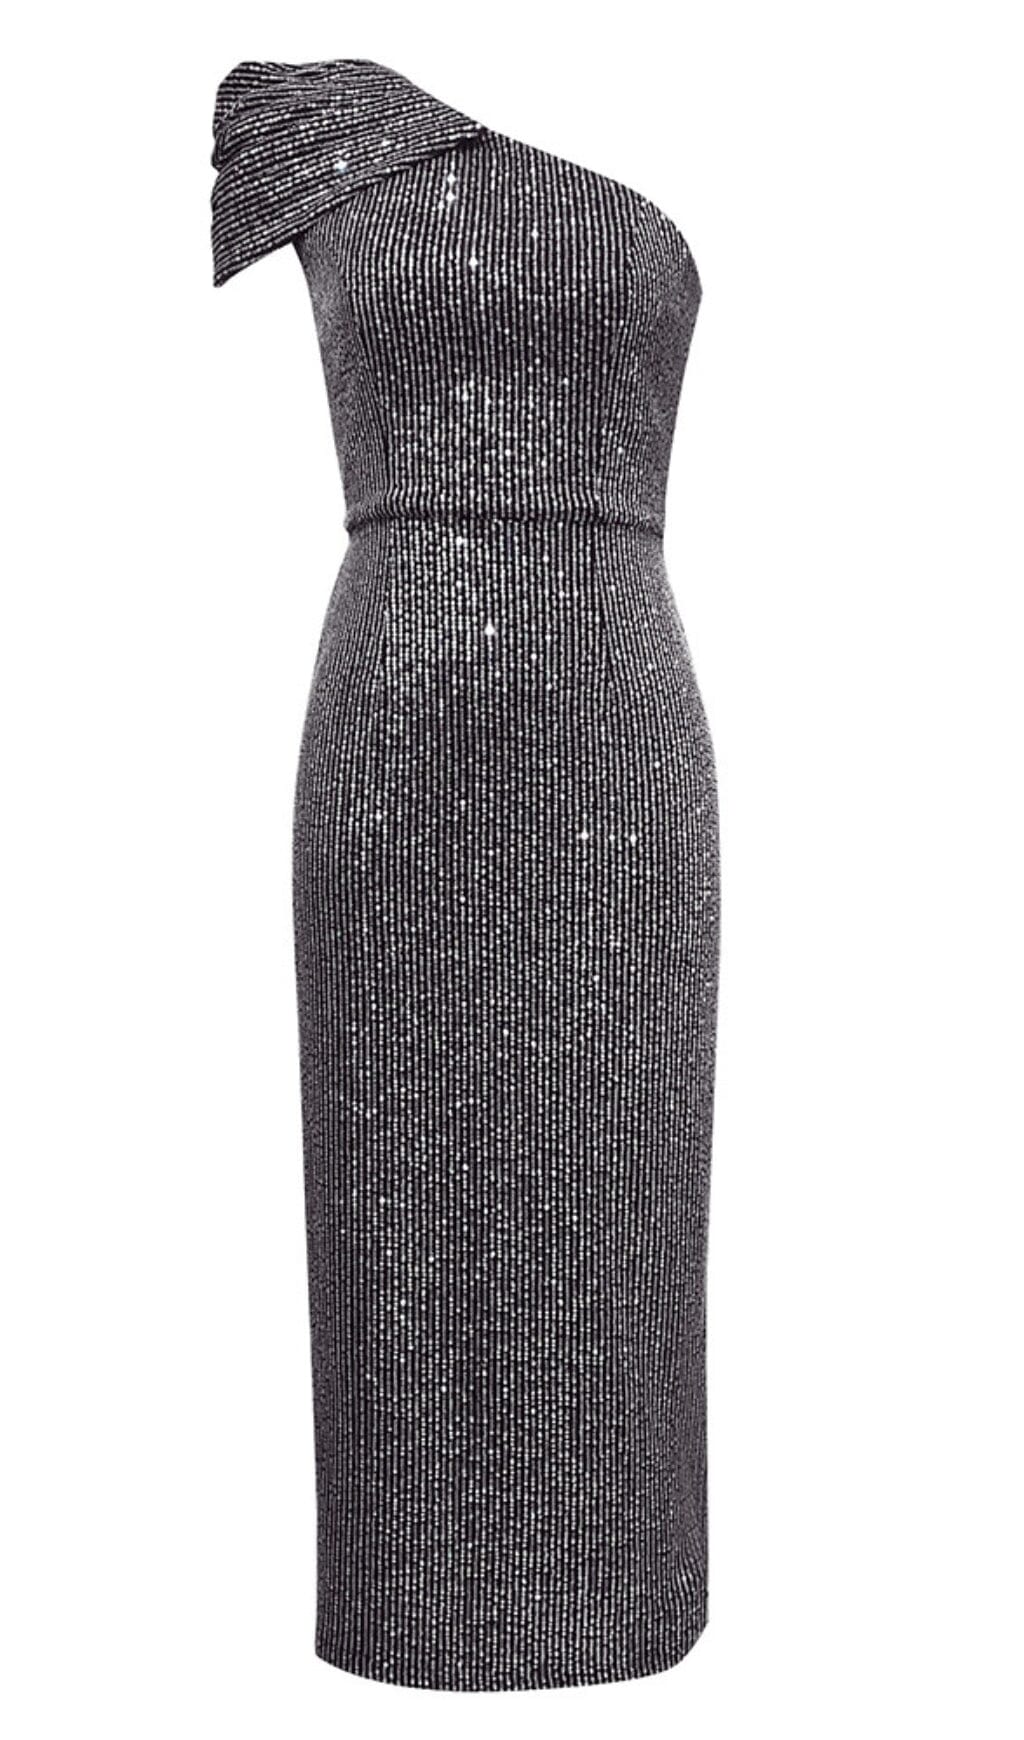 Sequined Dress in Black